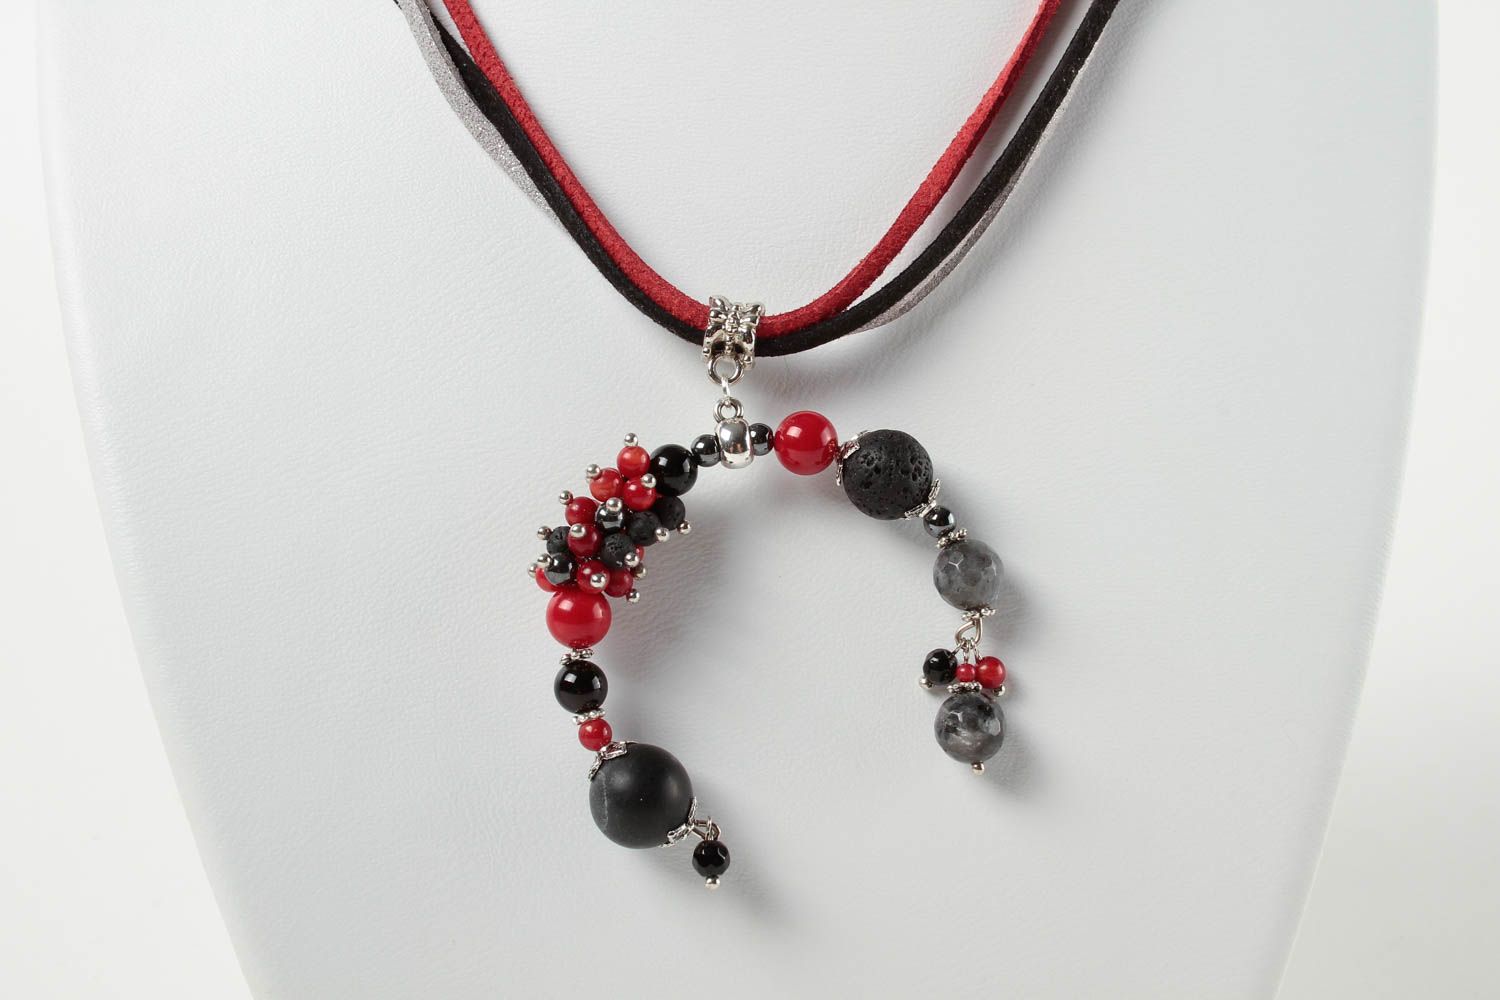 Handmade agate necklace hematite necklace jewelry with natural stones for women photo 2